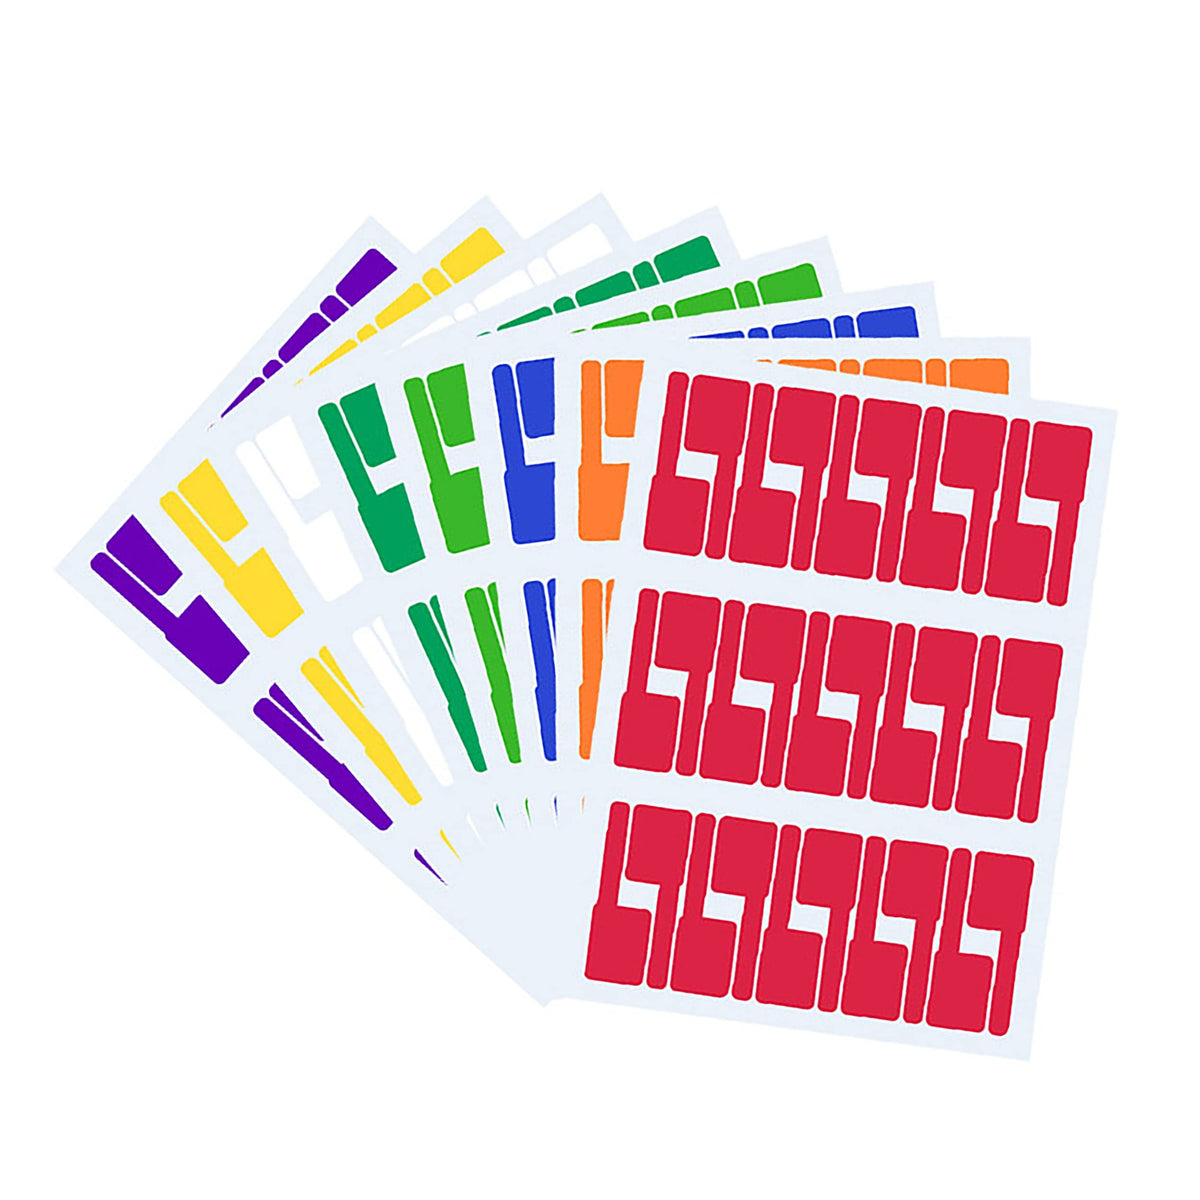 8 Sheet Self-Adhesive Cable Tags Computer Room Network Terminal Wire Cable Labels, Network Cable Markers, Color Cable Stickers